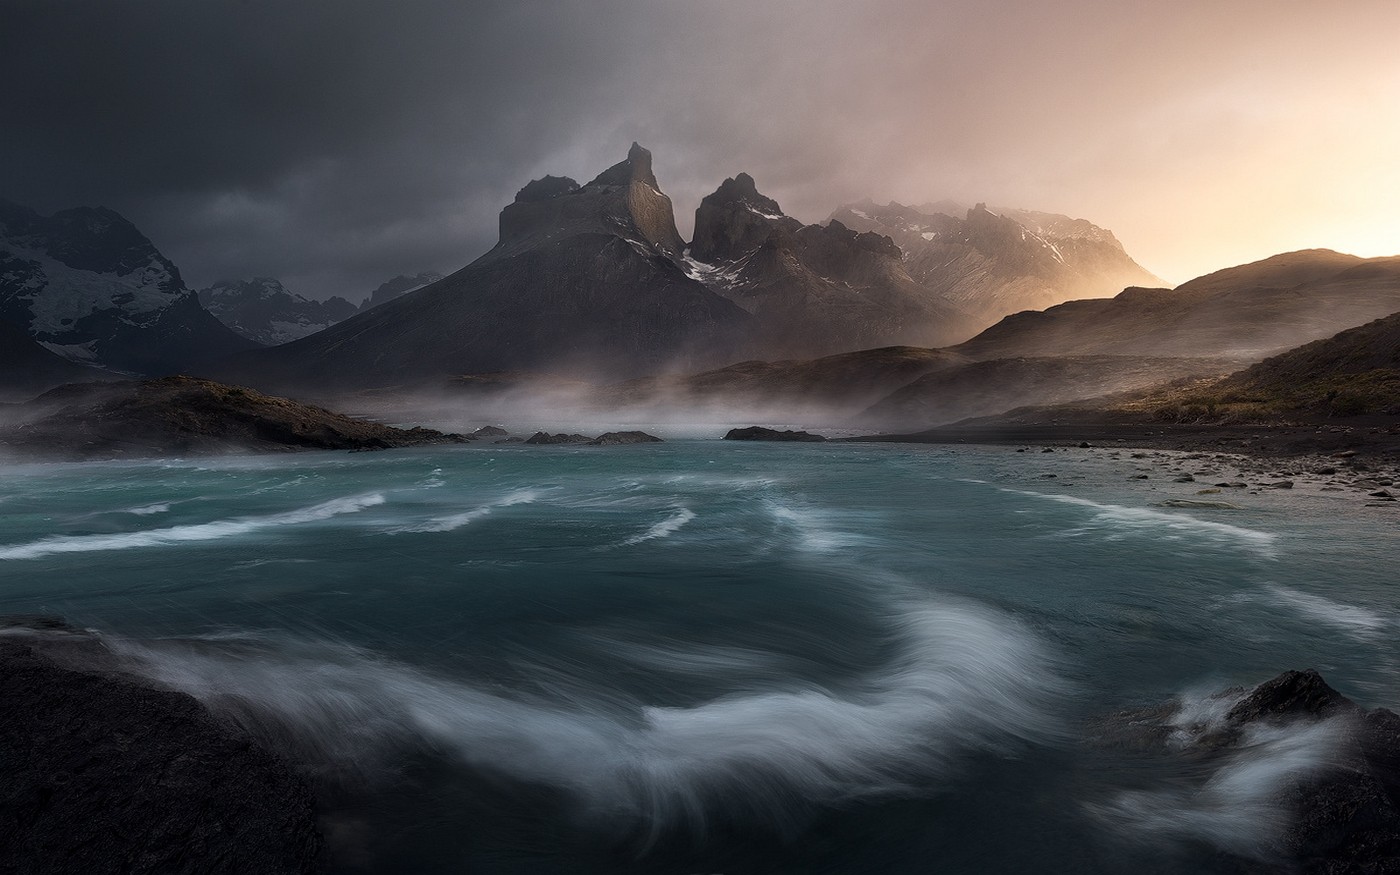 General 1400x875 nature landscape wind lake clouds mountains Torres del Paine Chile mist water snowy peak South America